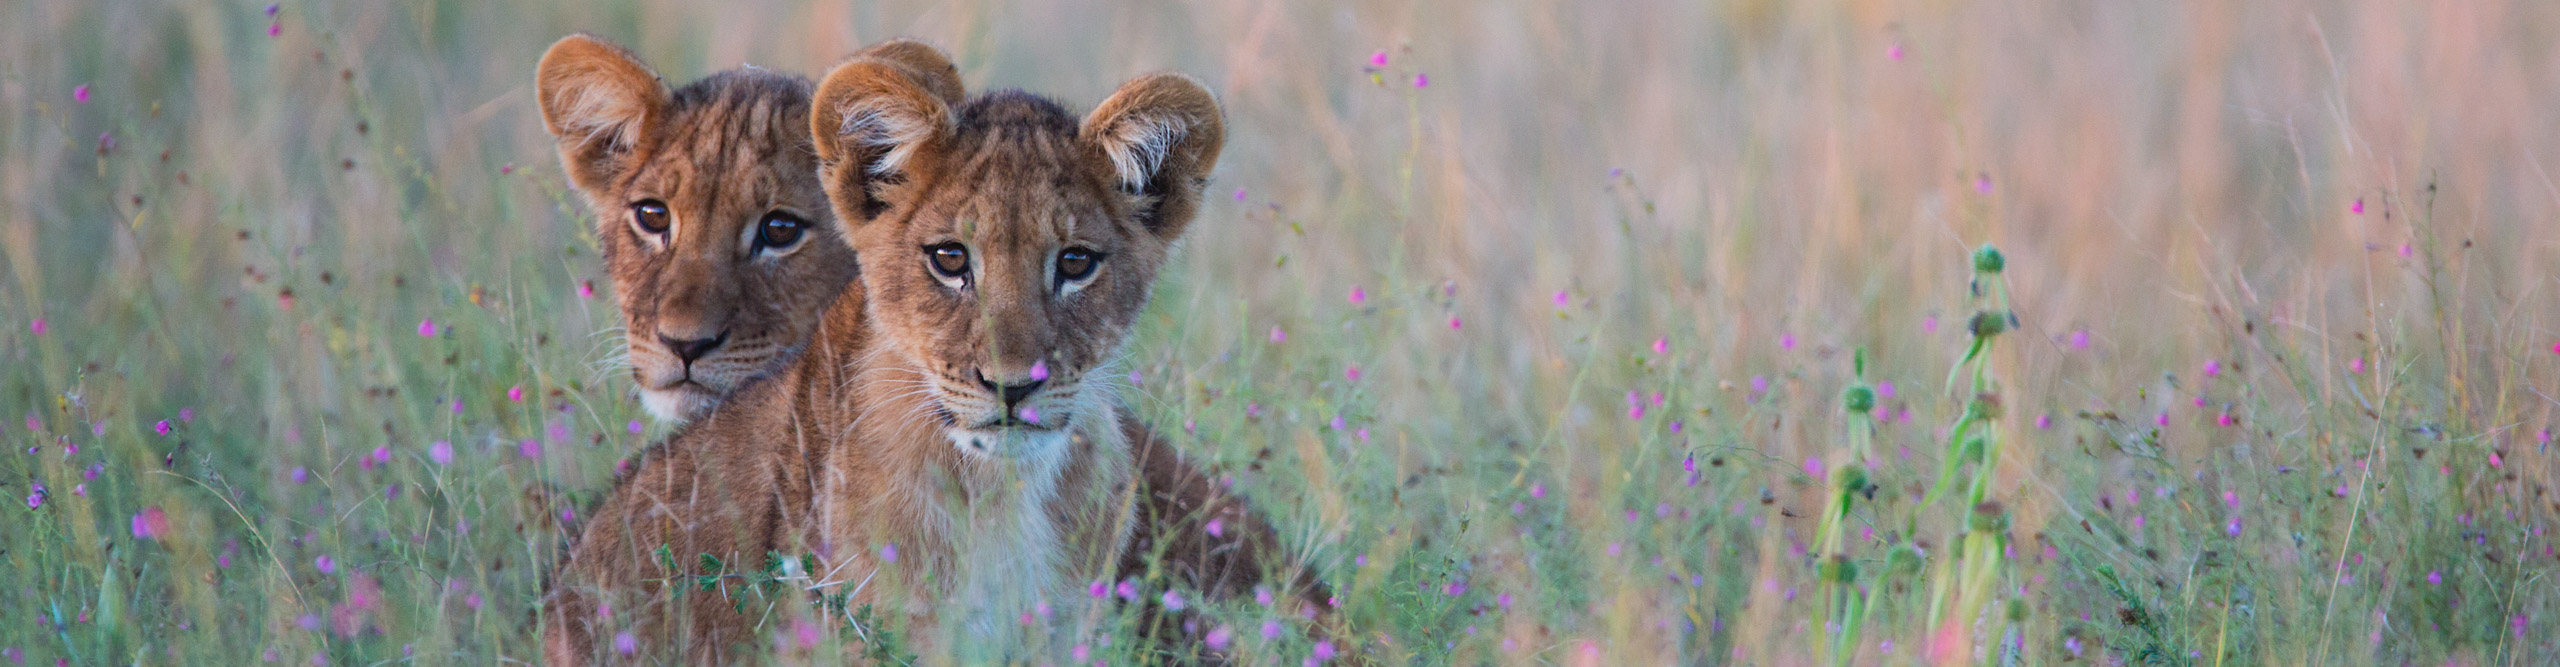 A pair of young lion cubs waiting for the return of their mother in grass, Botswana, Africa